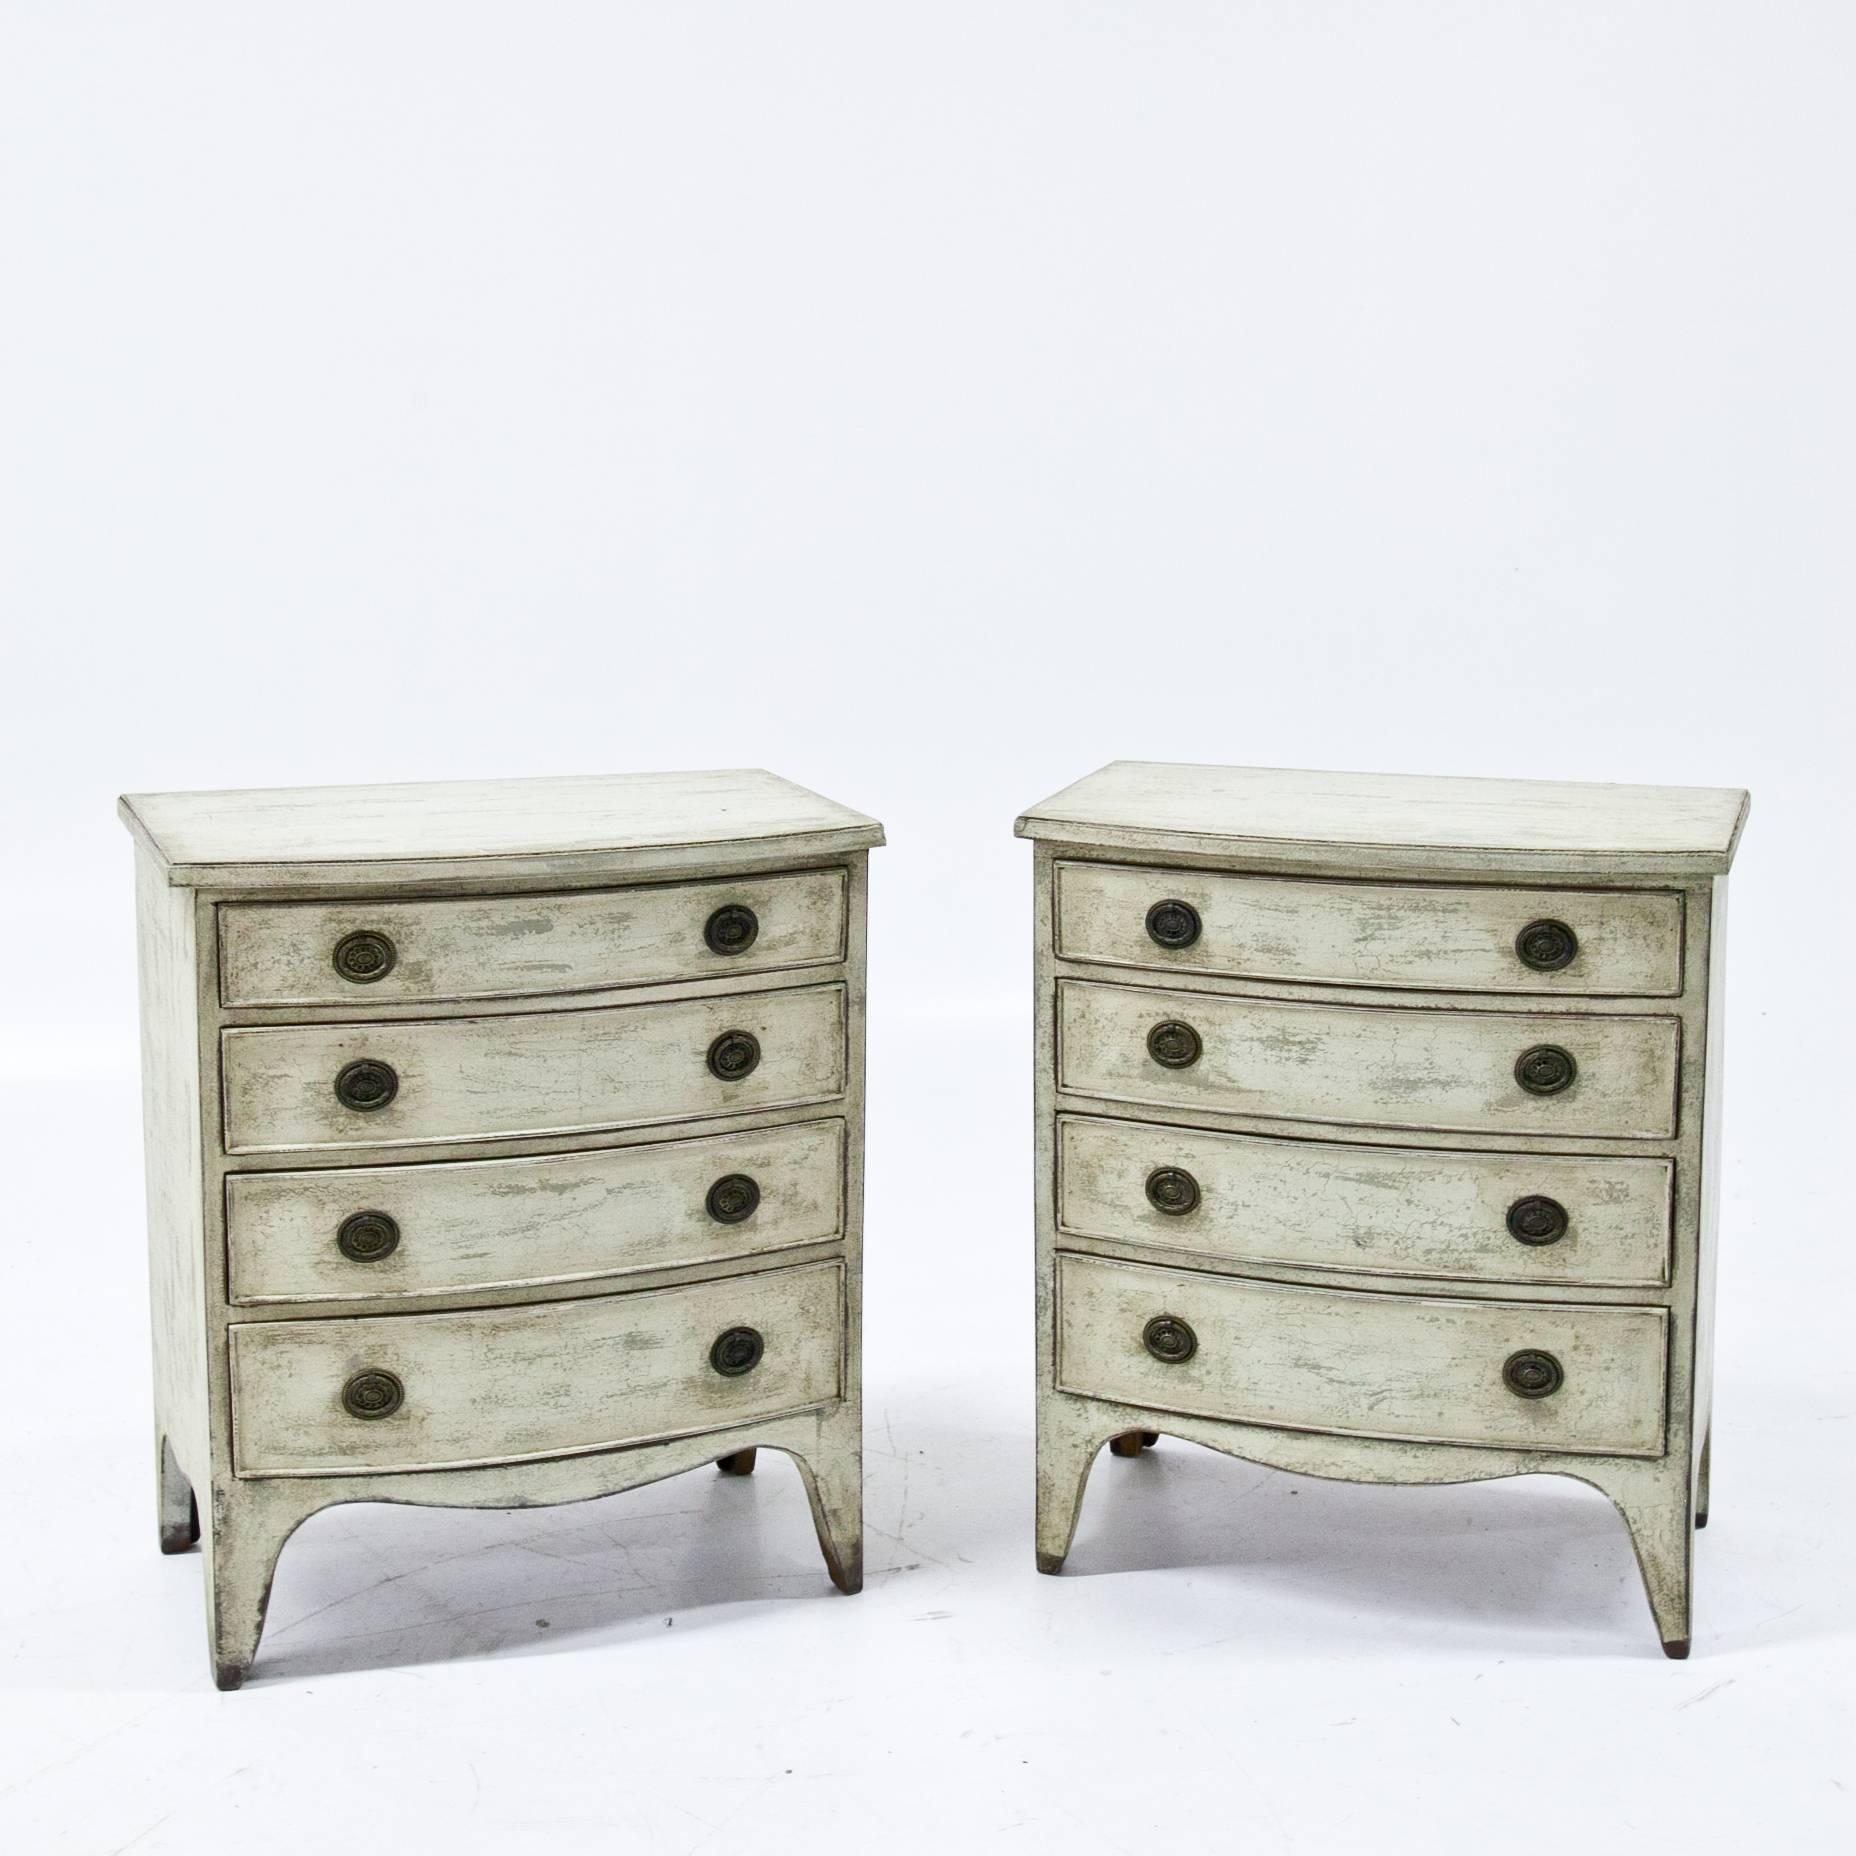 Pair of English chests of drawers on low legs with a softly curved skirt. The corpus has four drawers and a slightly curved front. The crème-white paint is slightly worn.